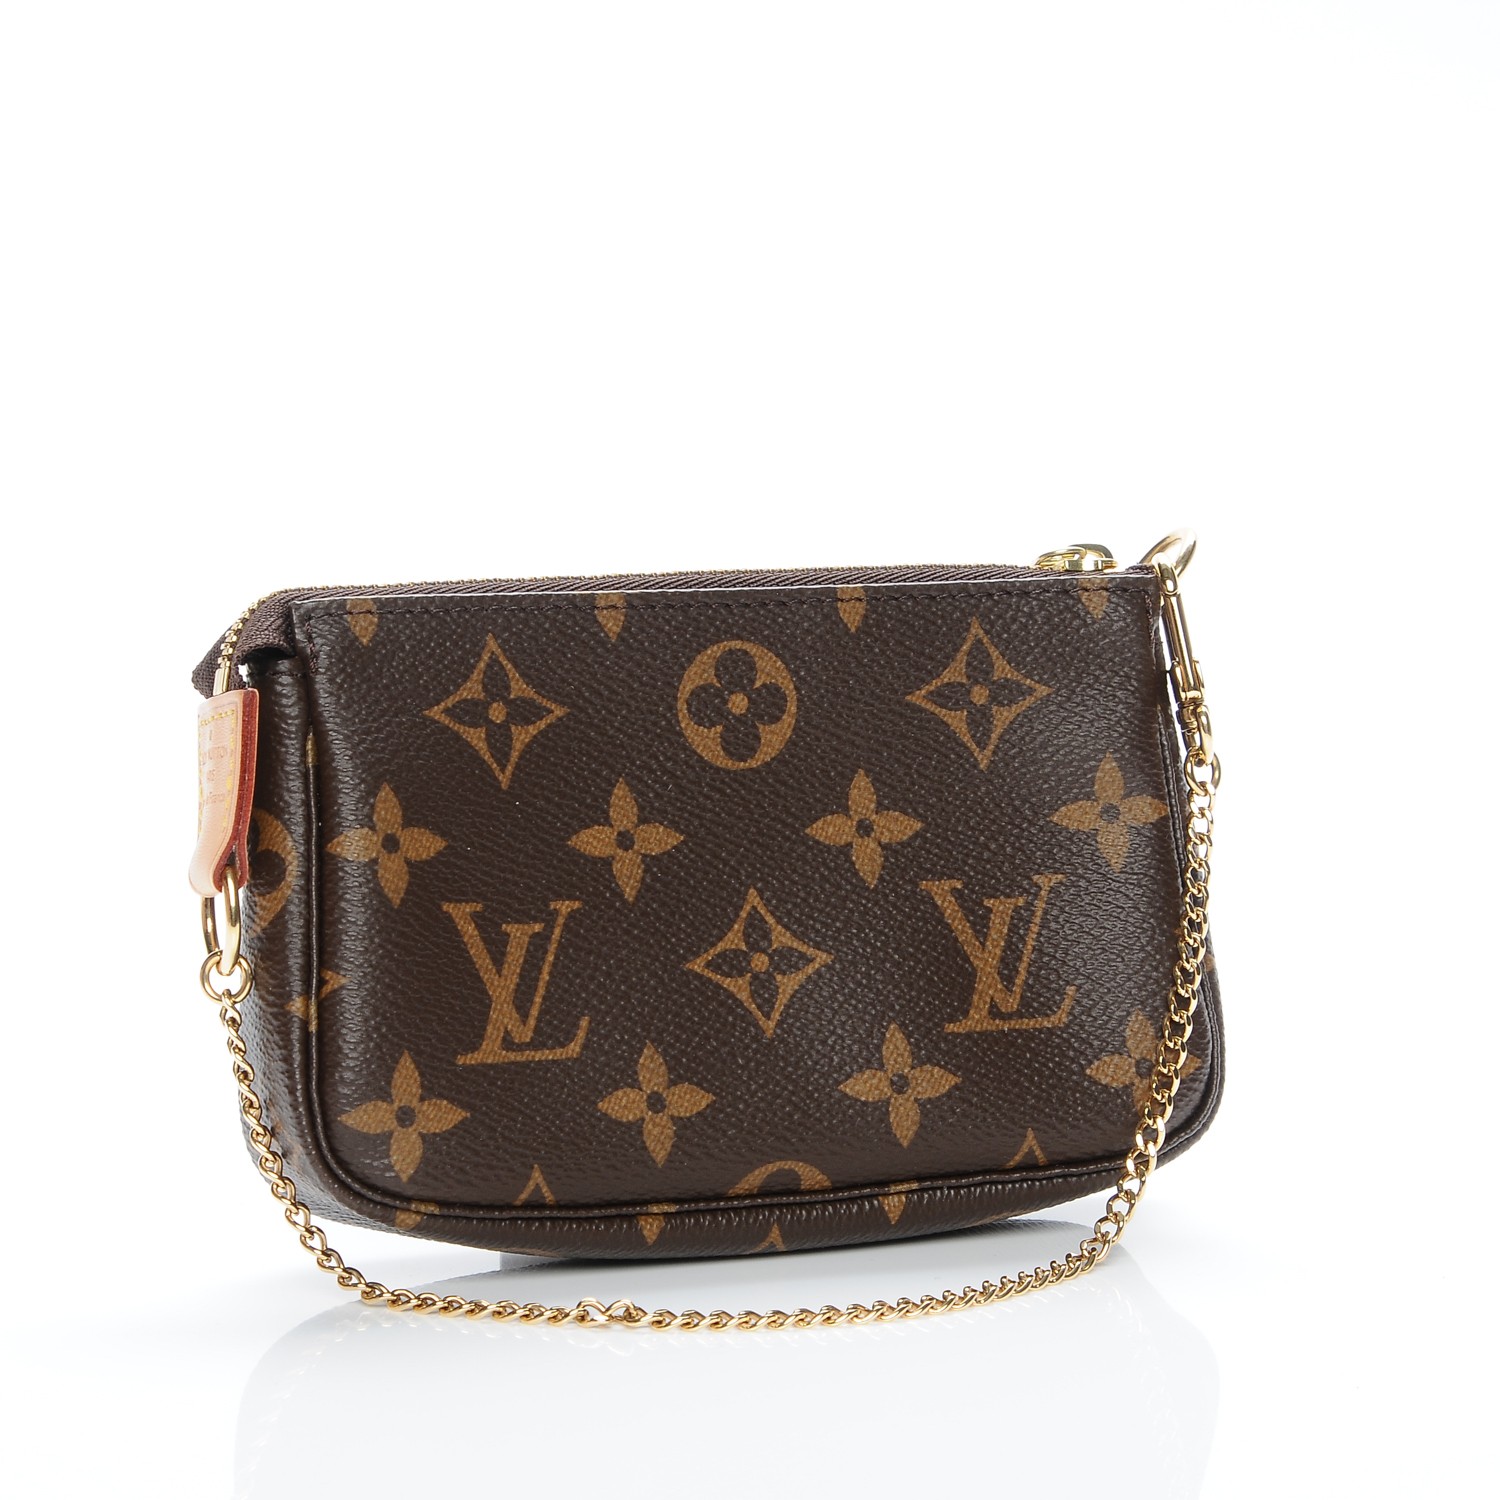 Finally got my Louis Vuitton Mini Pochette from the Escale Collection 